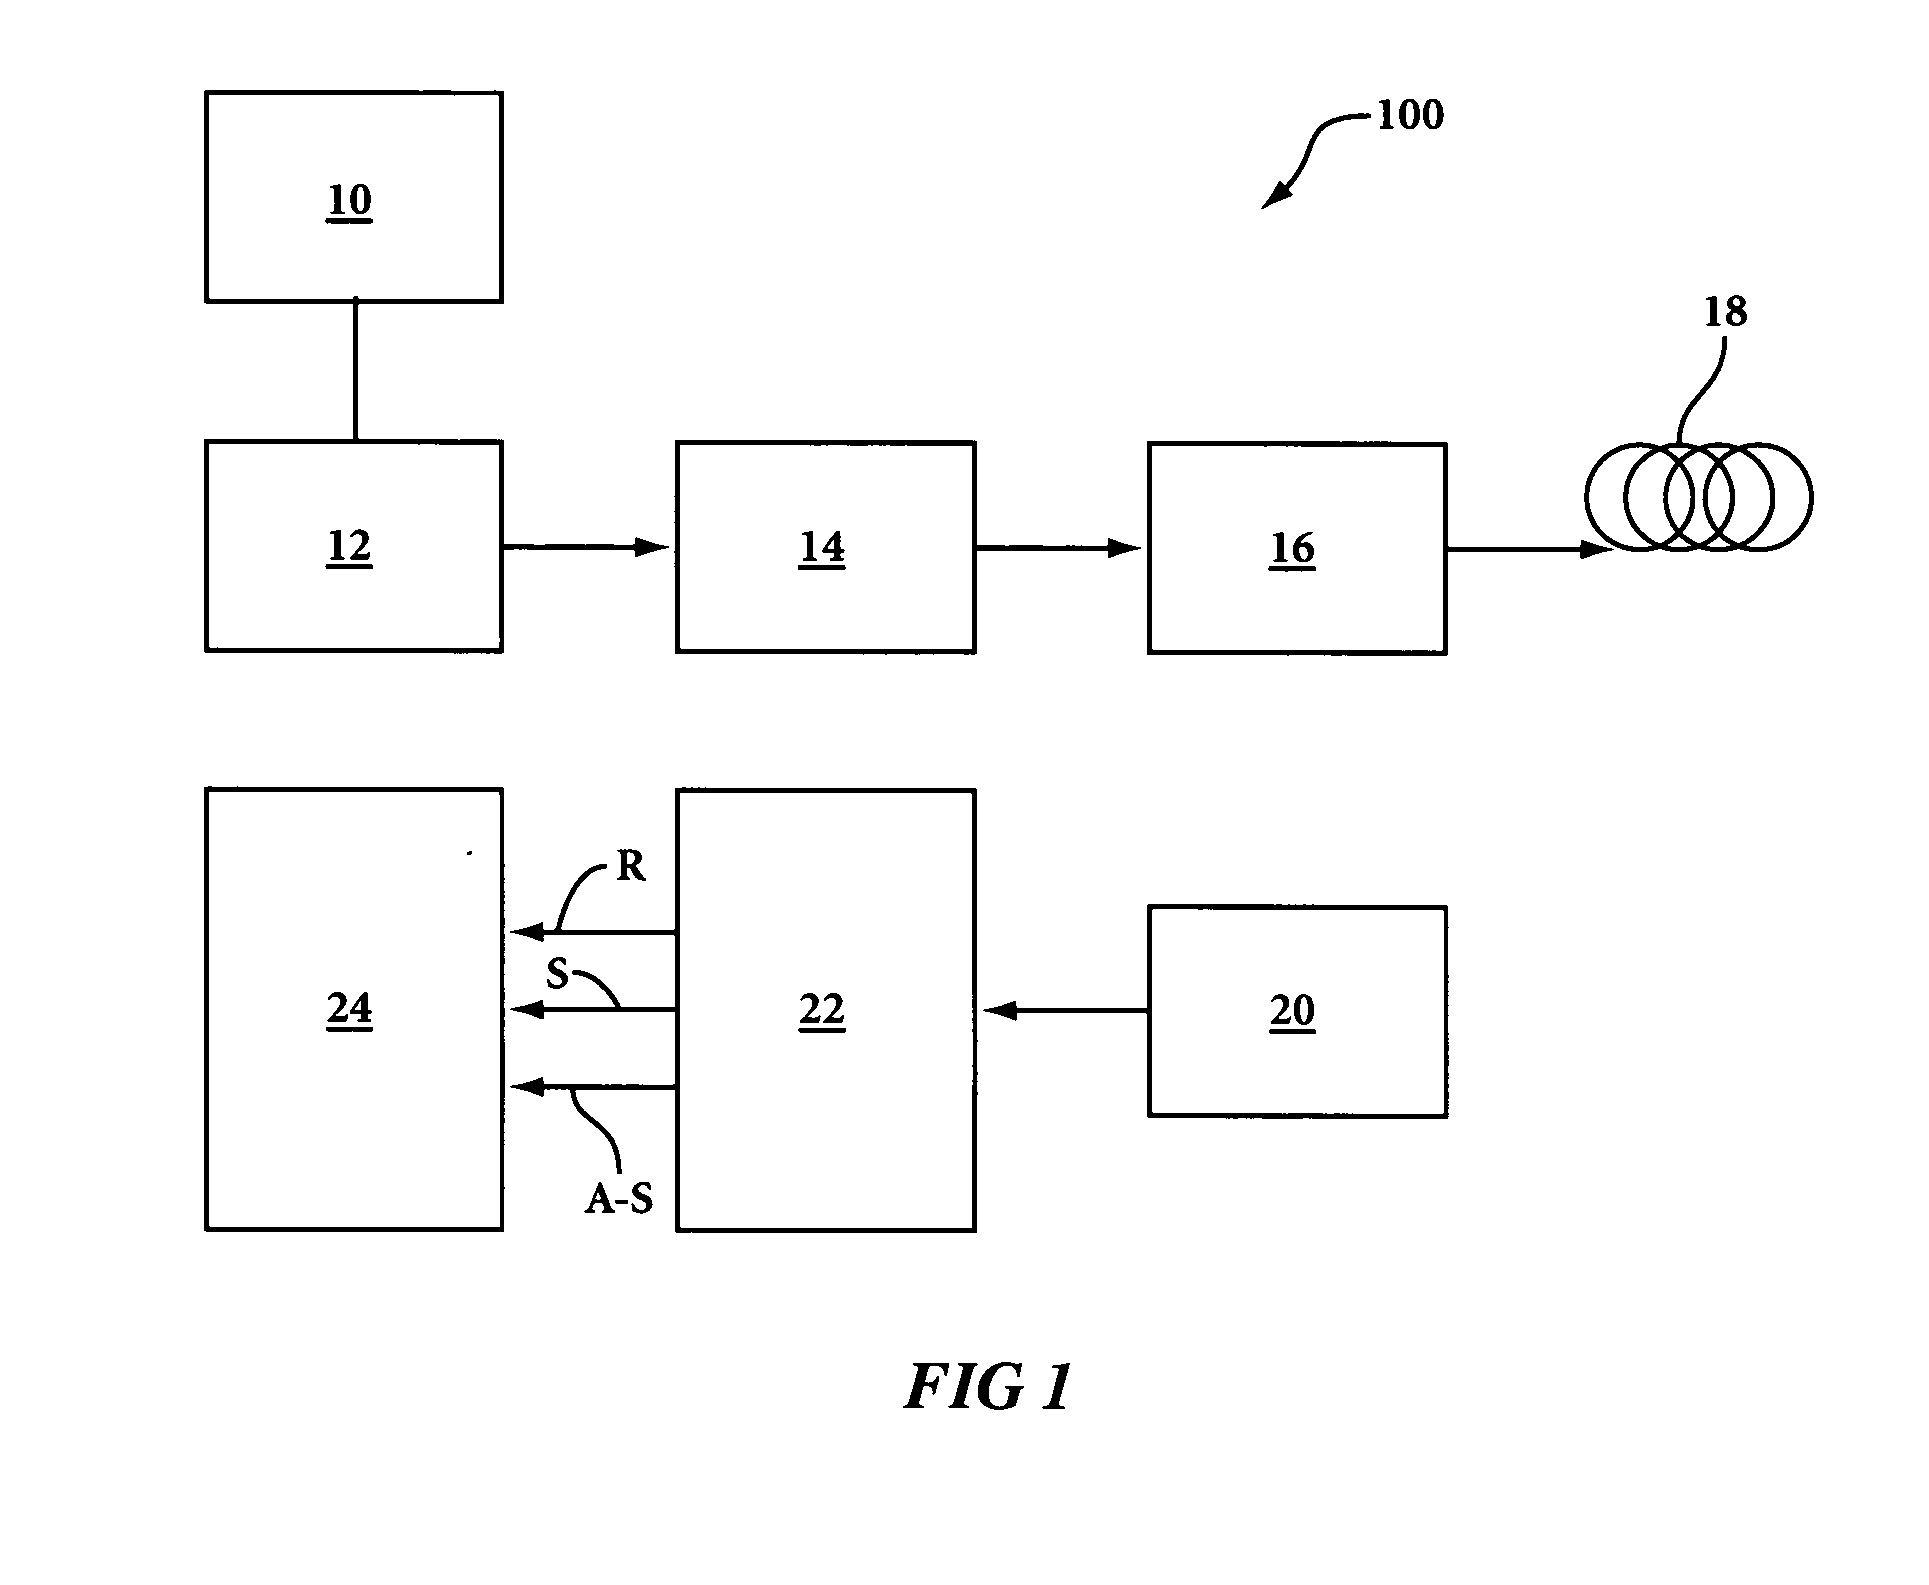 Single light source automatic calibration in distributed temperature sensing